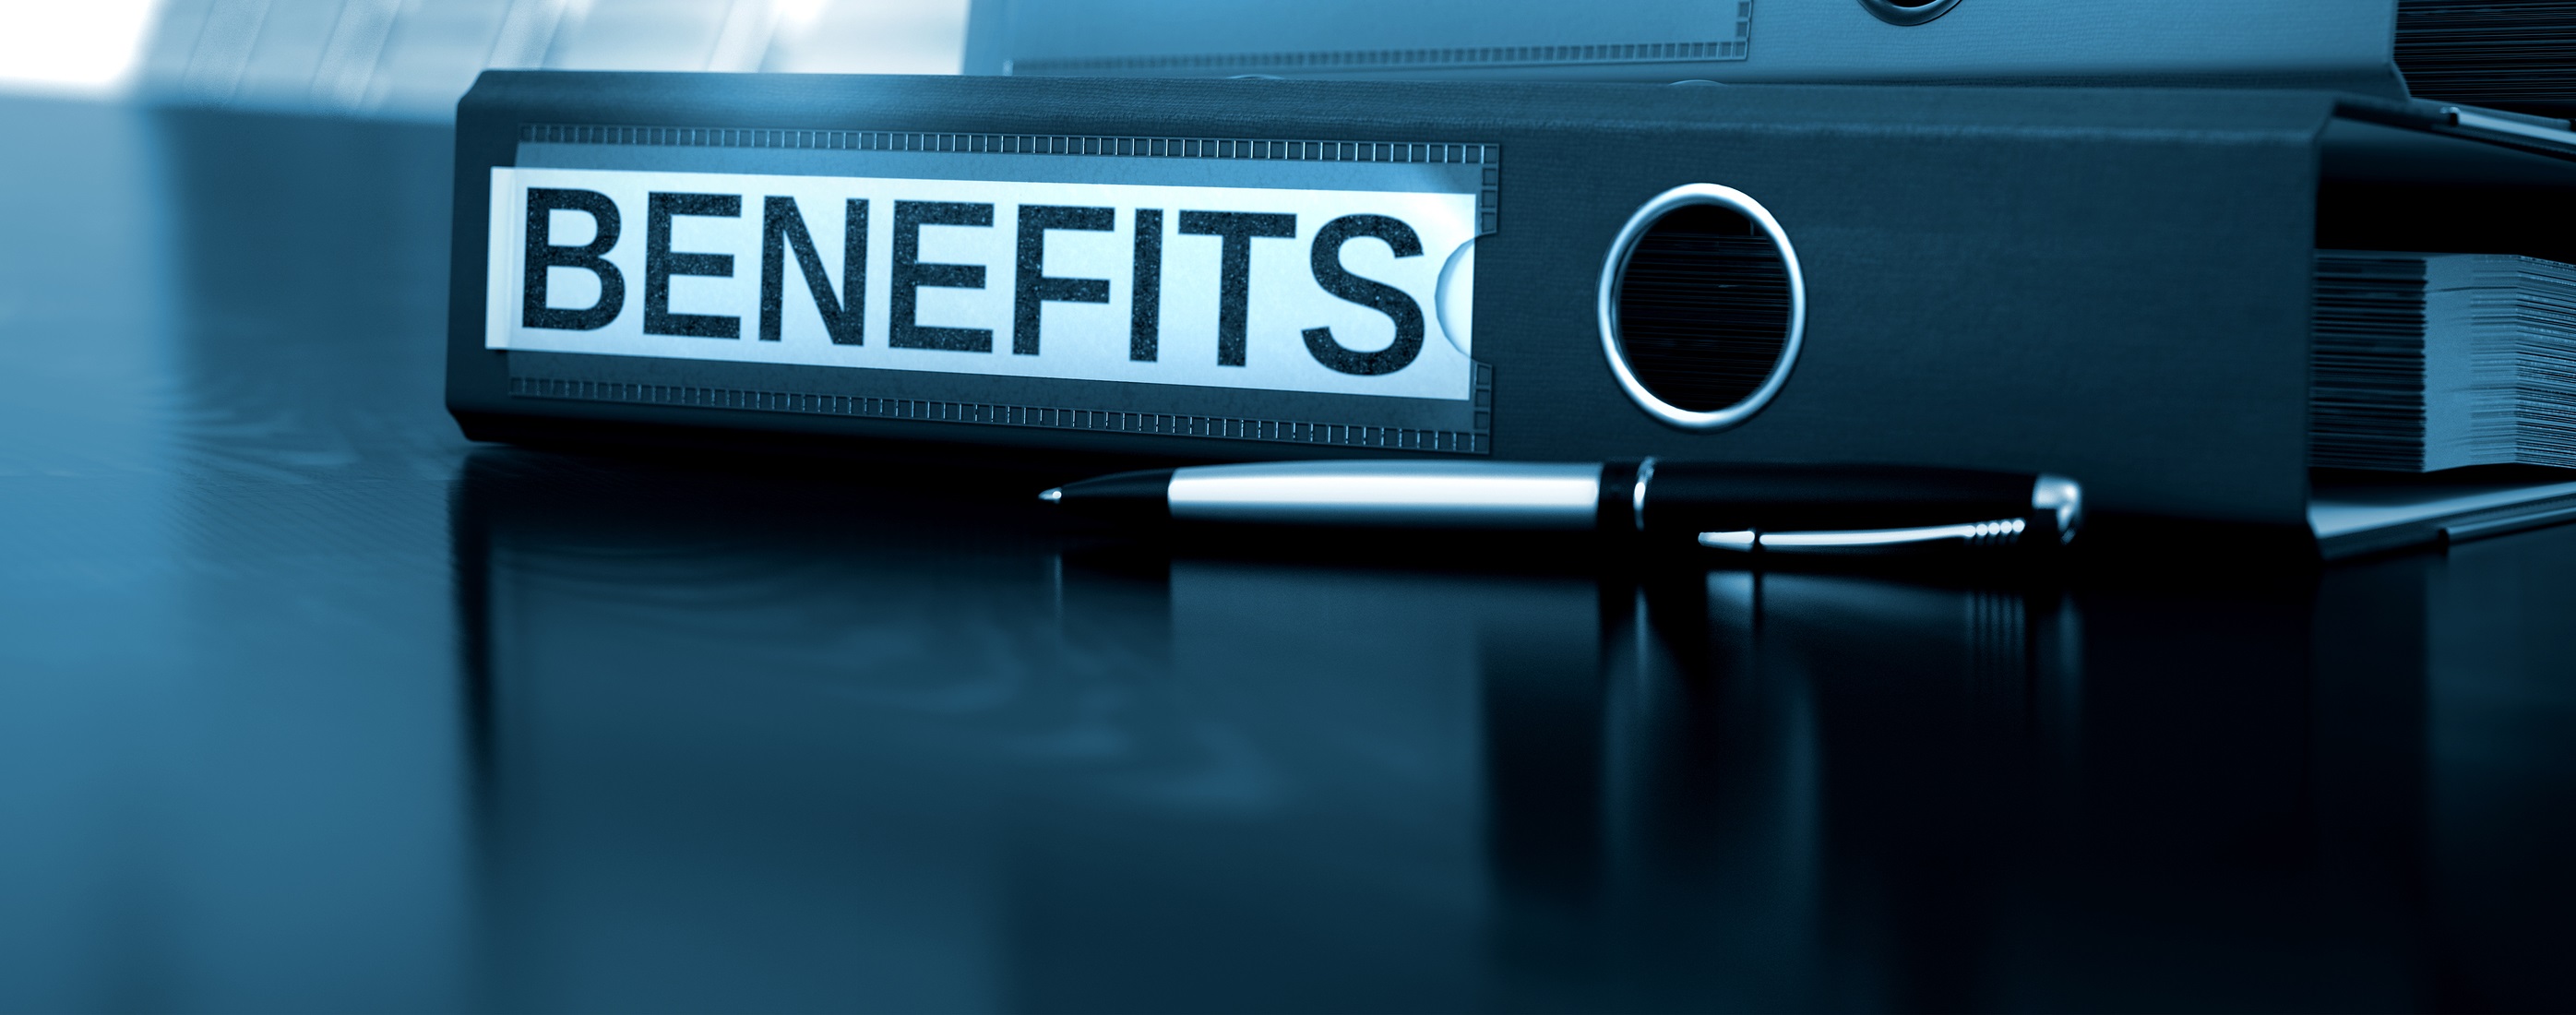 SIP Trunking Benefits